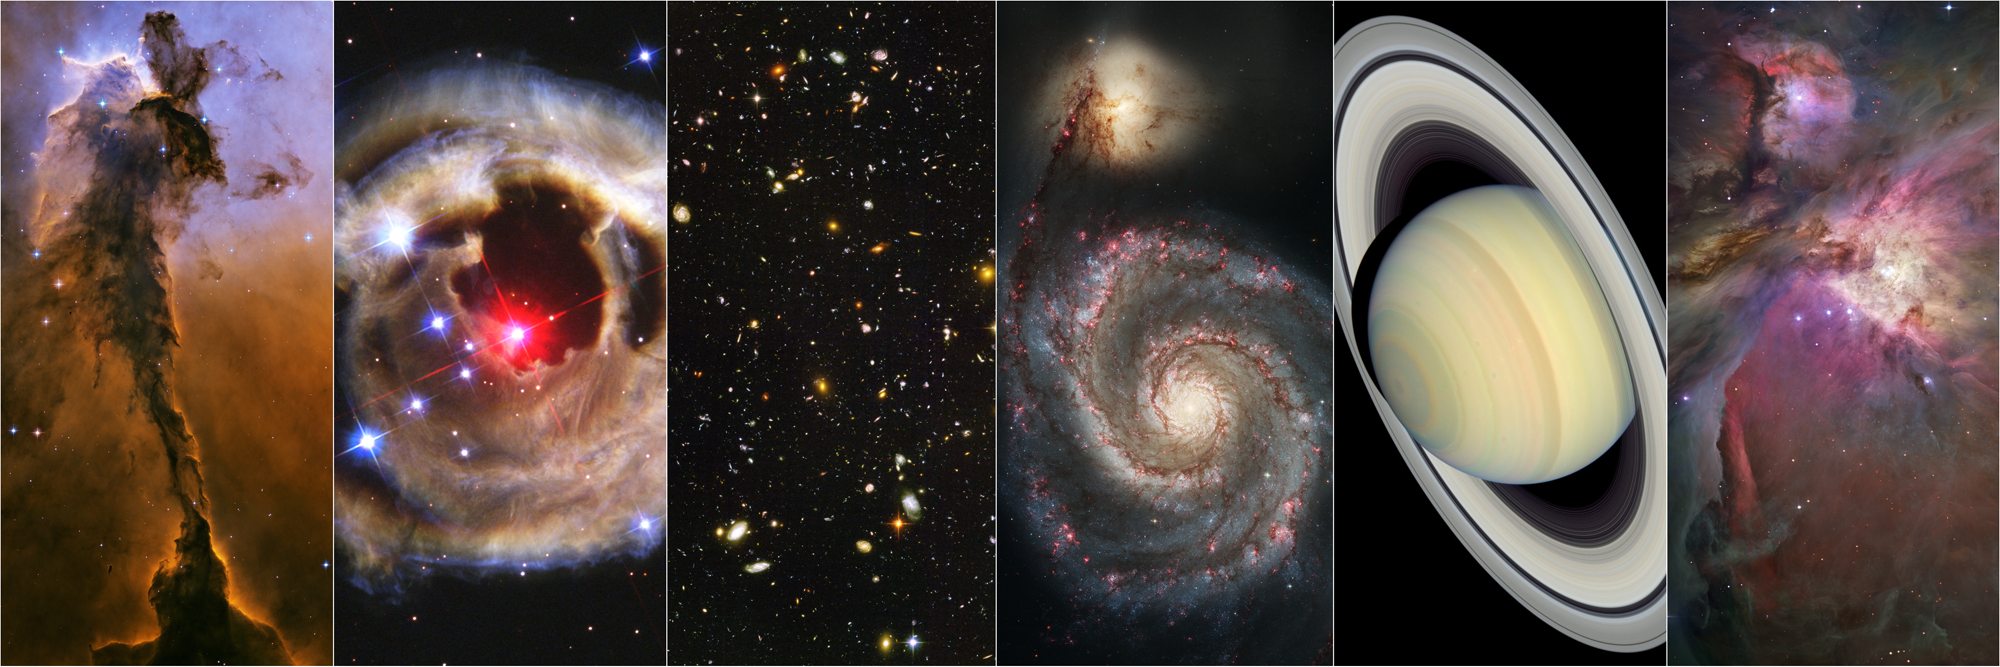 Left to right: the spire in the eagle nebula, v838 monocerotis, the hubble ultra deep field, the whirlpool galaxy, saturn, and the orion nebula.